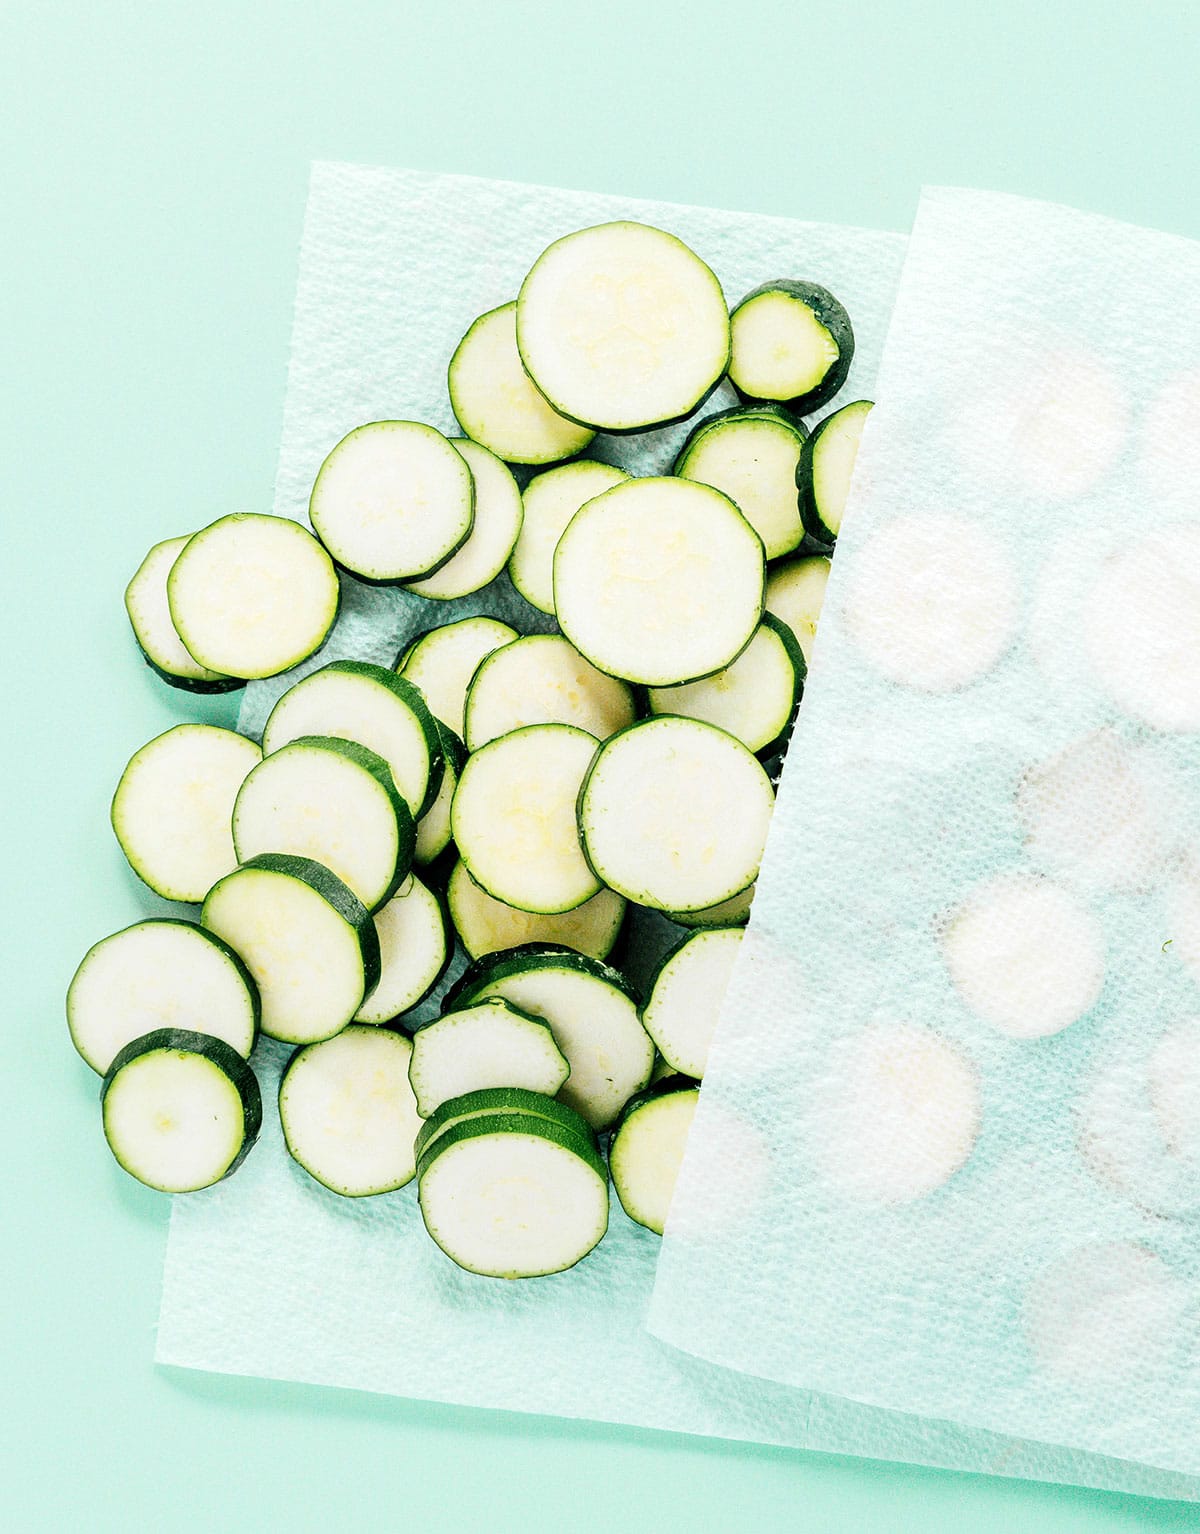 Zucchini rounds being pressed between layers of paper towel.